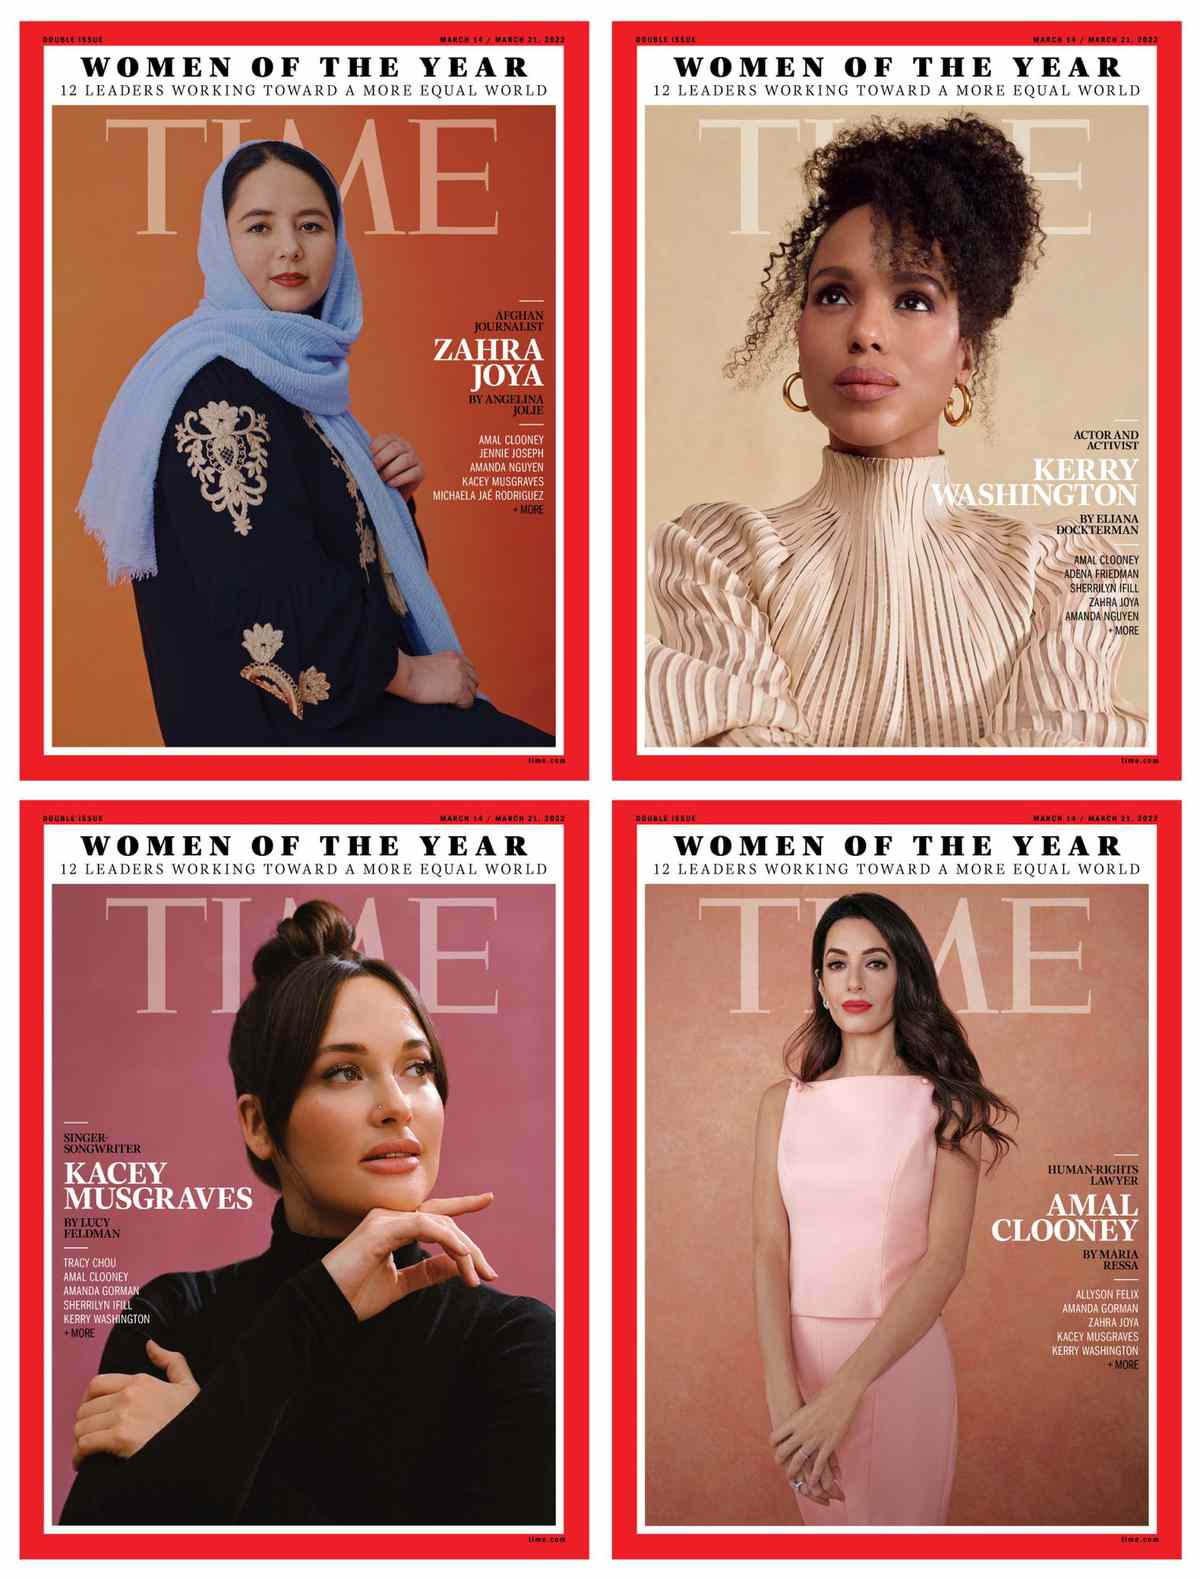 Time Magazine Women of the Year Covers